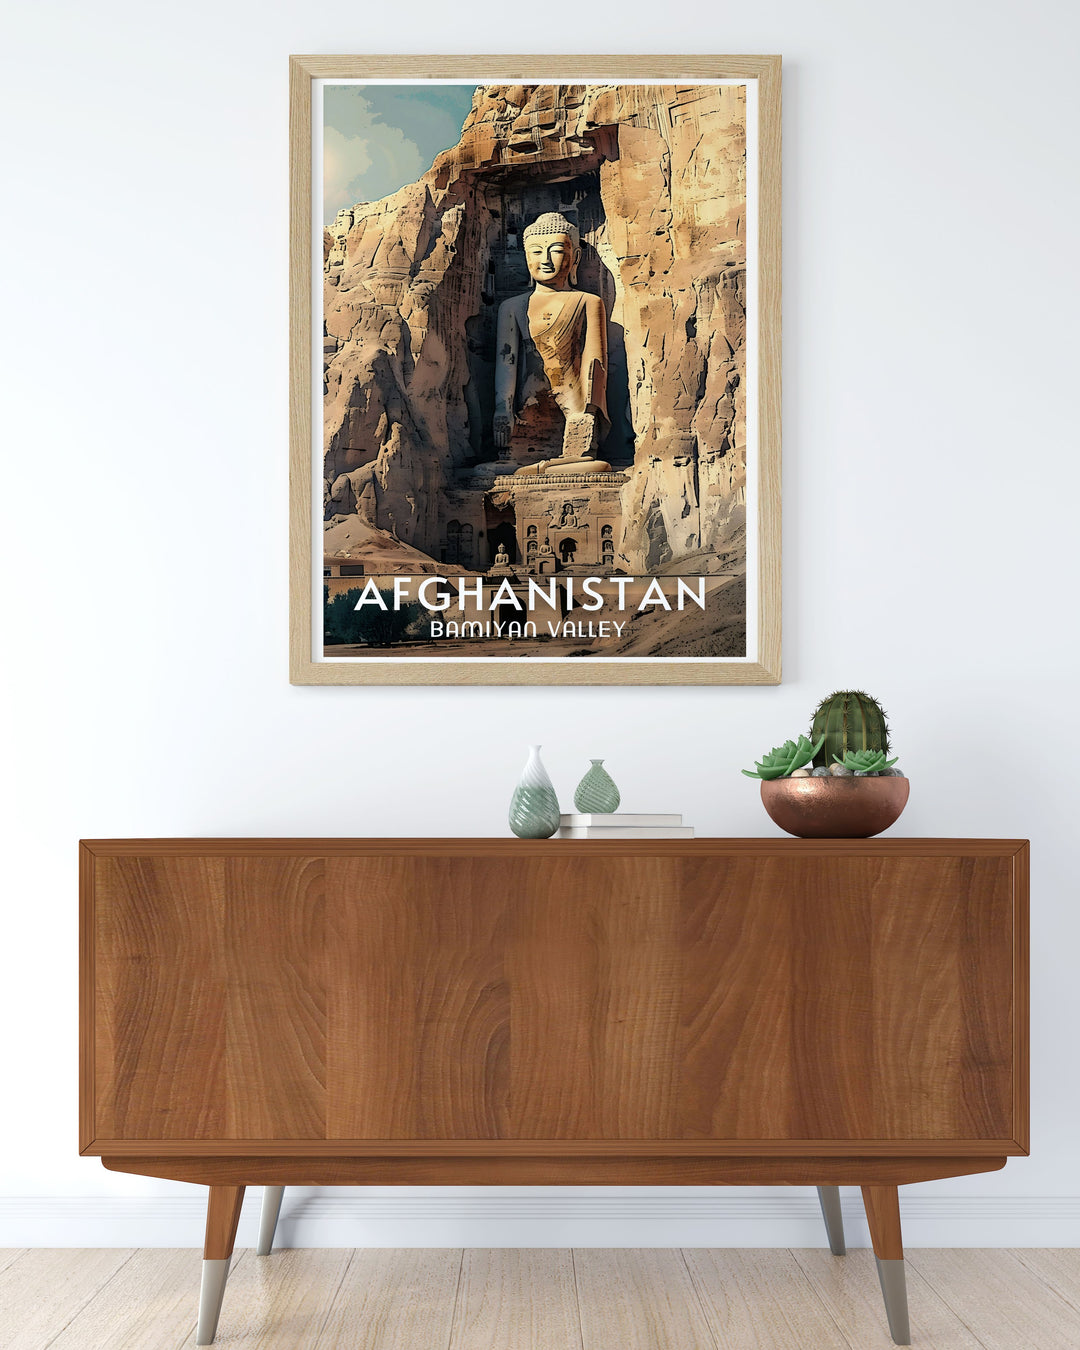 Captivating Bamiyan Valley and Buddhas artwork ideal for birthdays anniversaries or special occasions a unique gift that combines history culture and stunning visuals